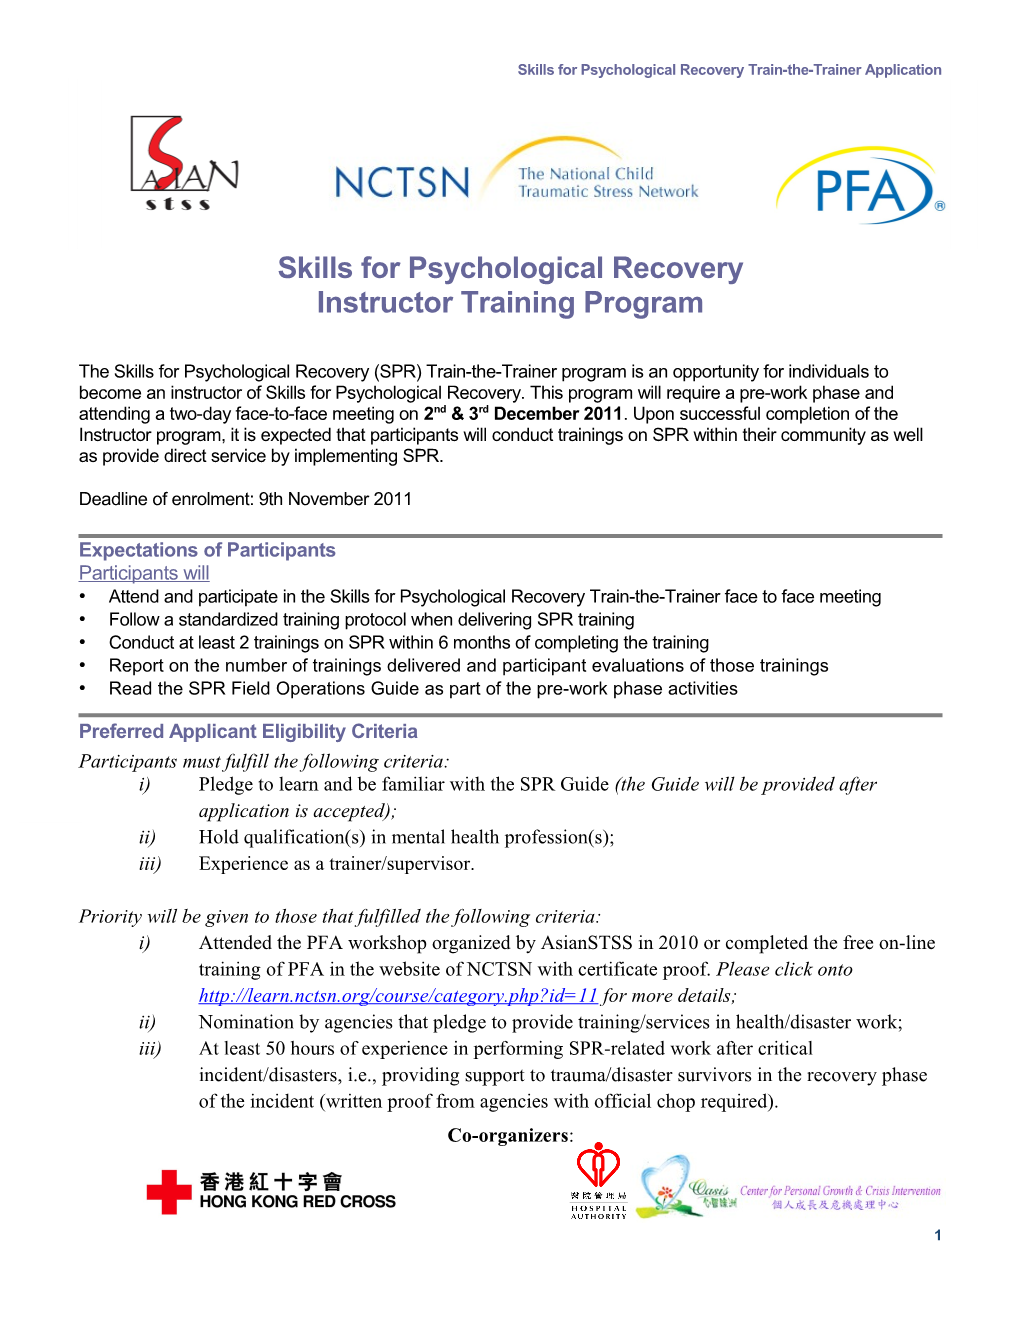 Skills for Psychological Recovery Instructor Training Program